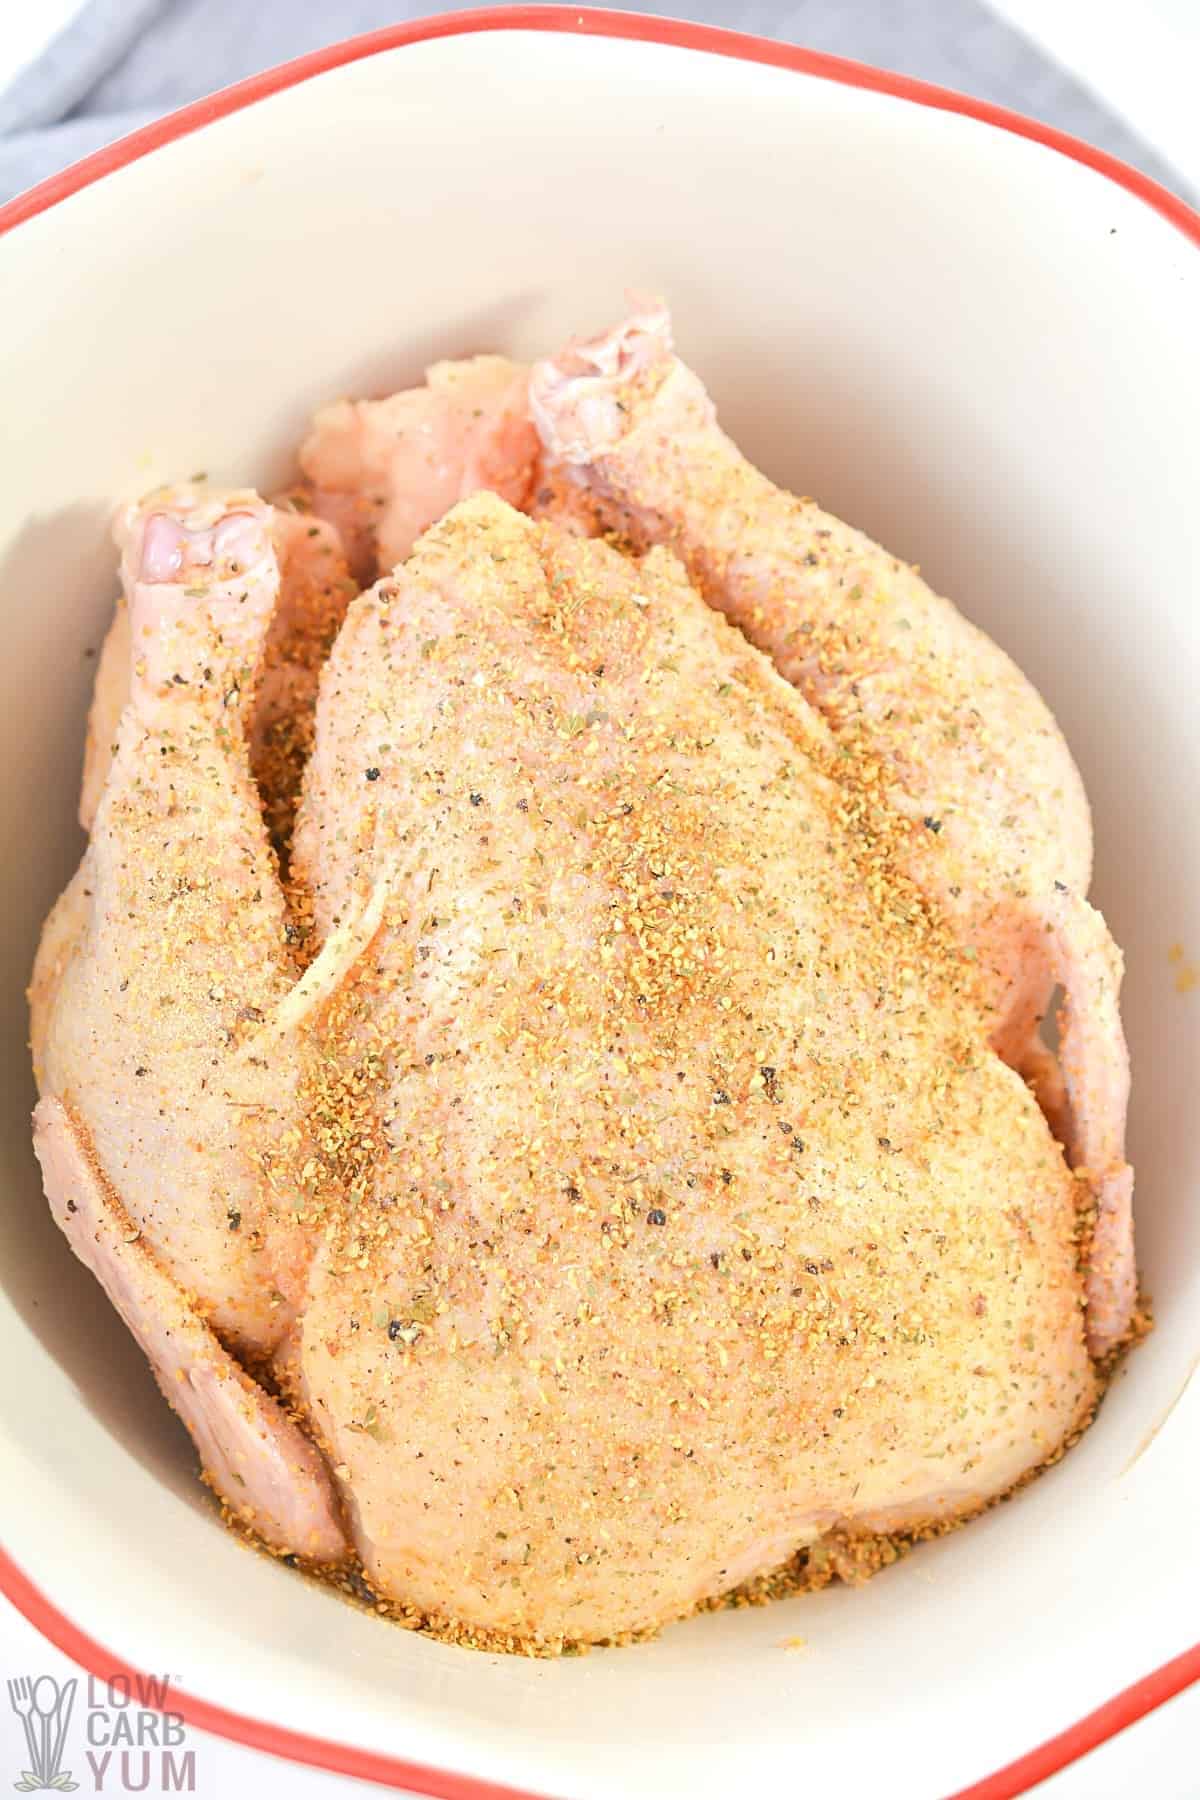 poultry seasoning rubbed over chicken for air fryer cooking